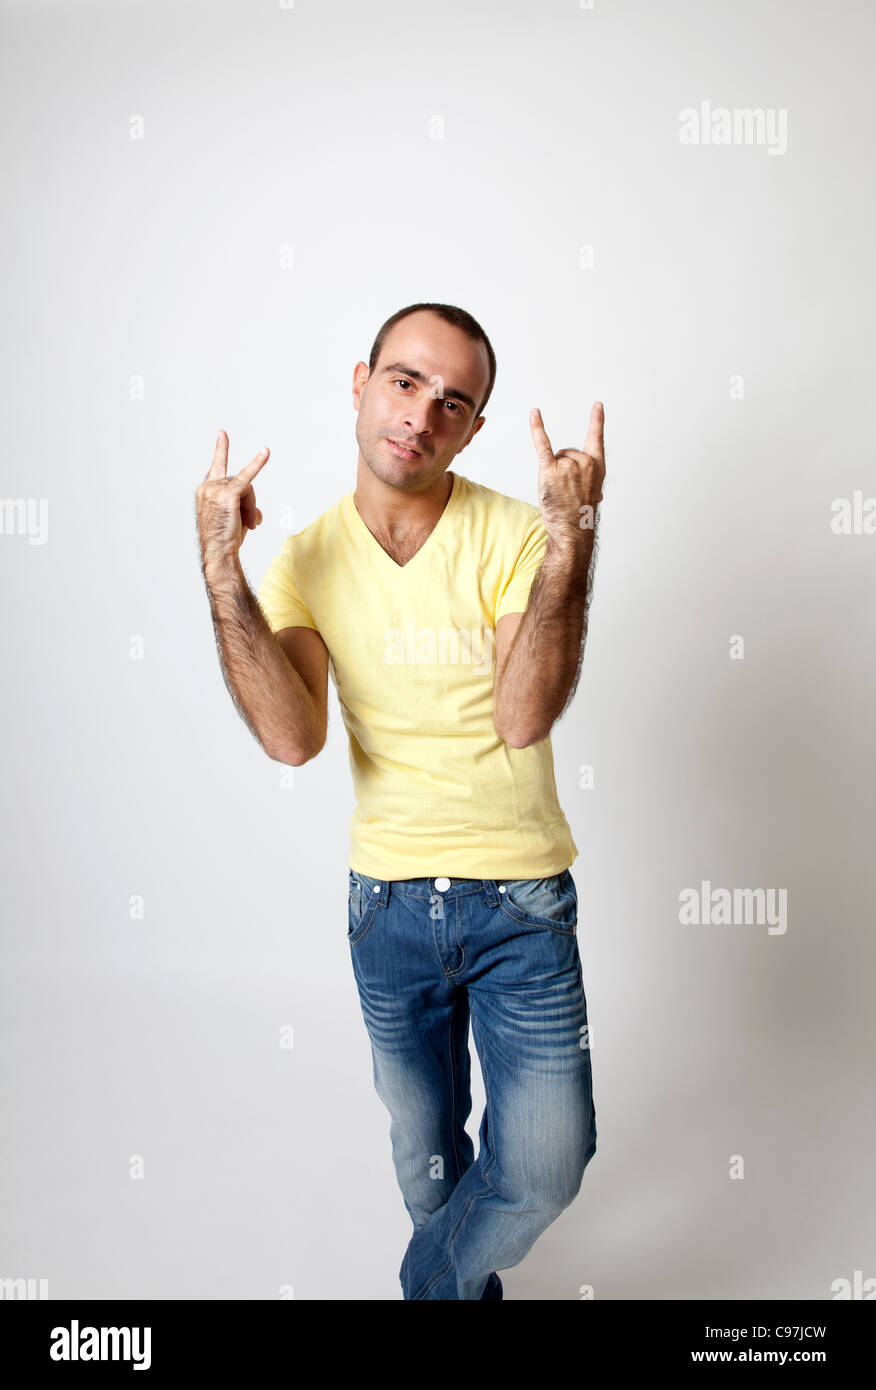 Man in casual clothing making hand gesture Stock Photo